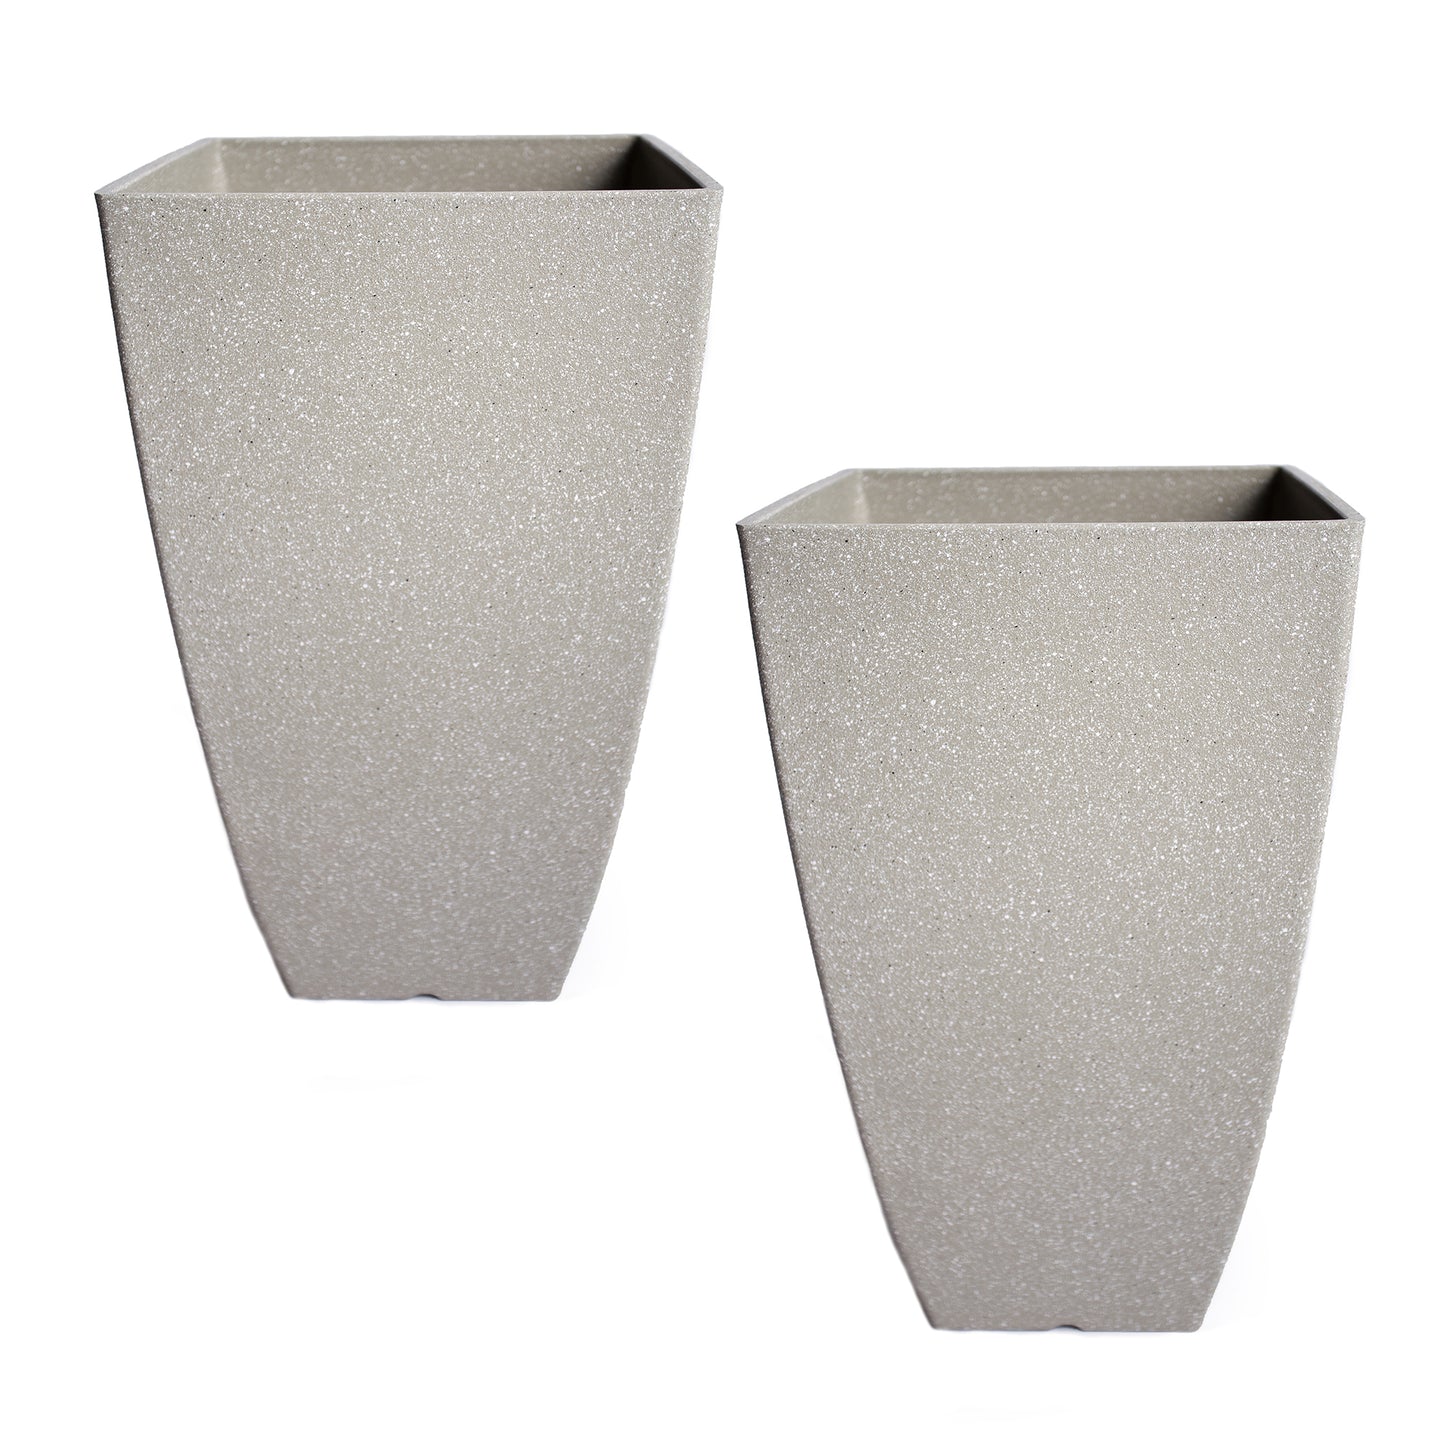 Modern Indoor/Outdoor Planters for Home Decor 2 Pack